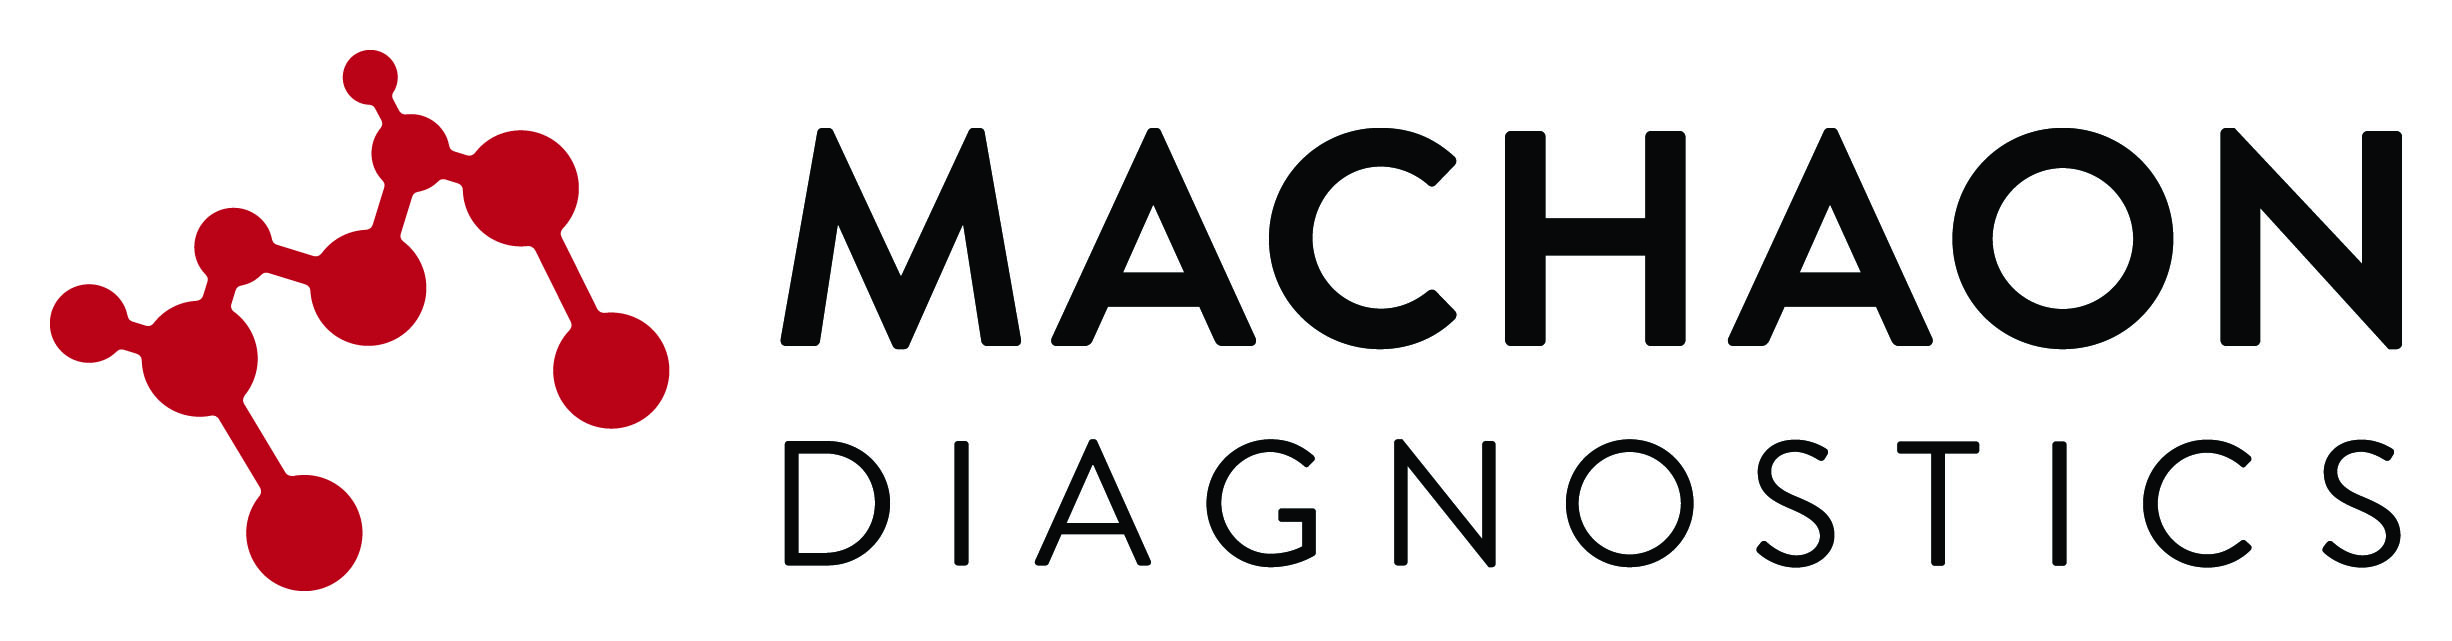 Machaon Diagnostics, Inc.  - <span>Machaon Diagnostics is a clinical reference laboratory and contract research organization (CRO